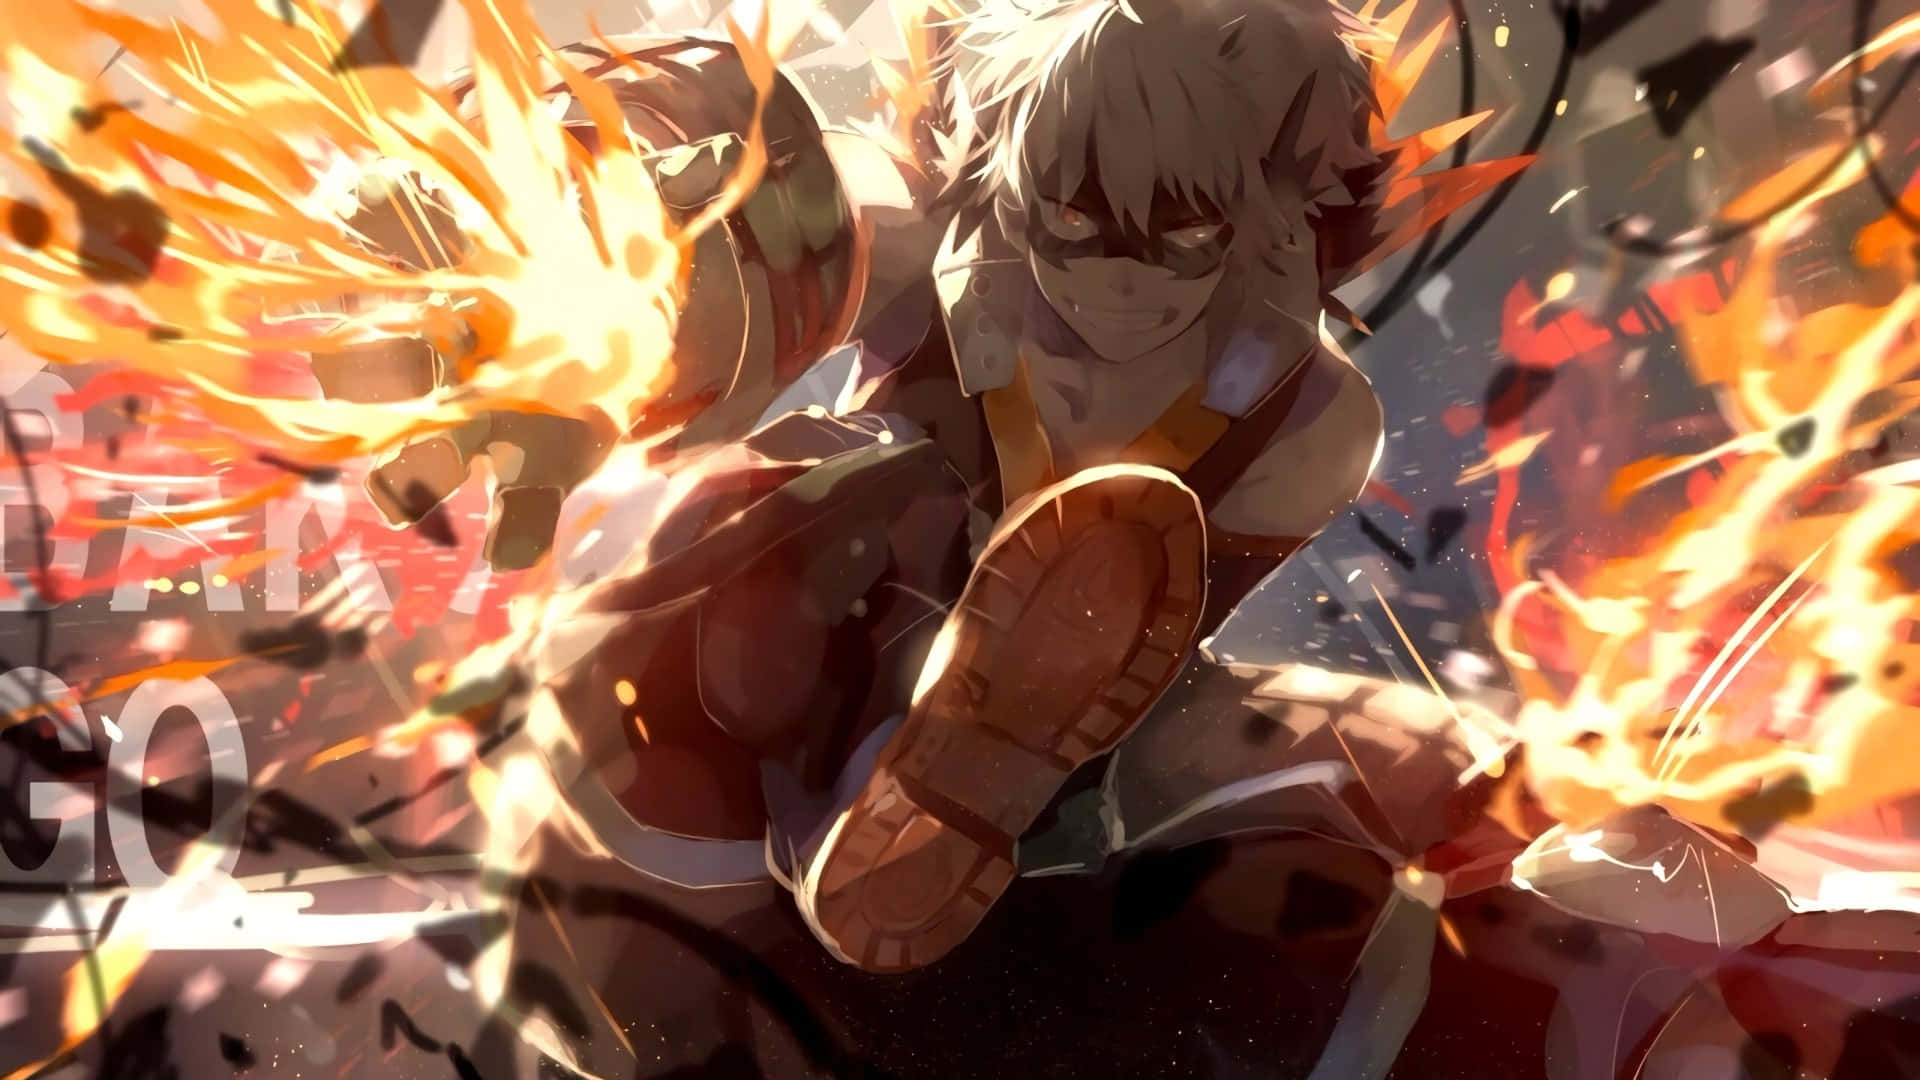 Step up your desktop game with Bakugou Aesthetic's vibrant and edgy vibe. Wallpaper